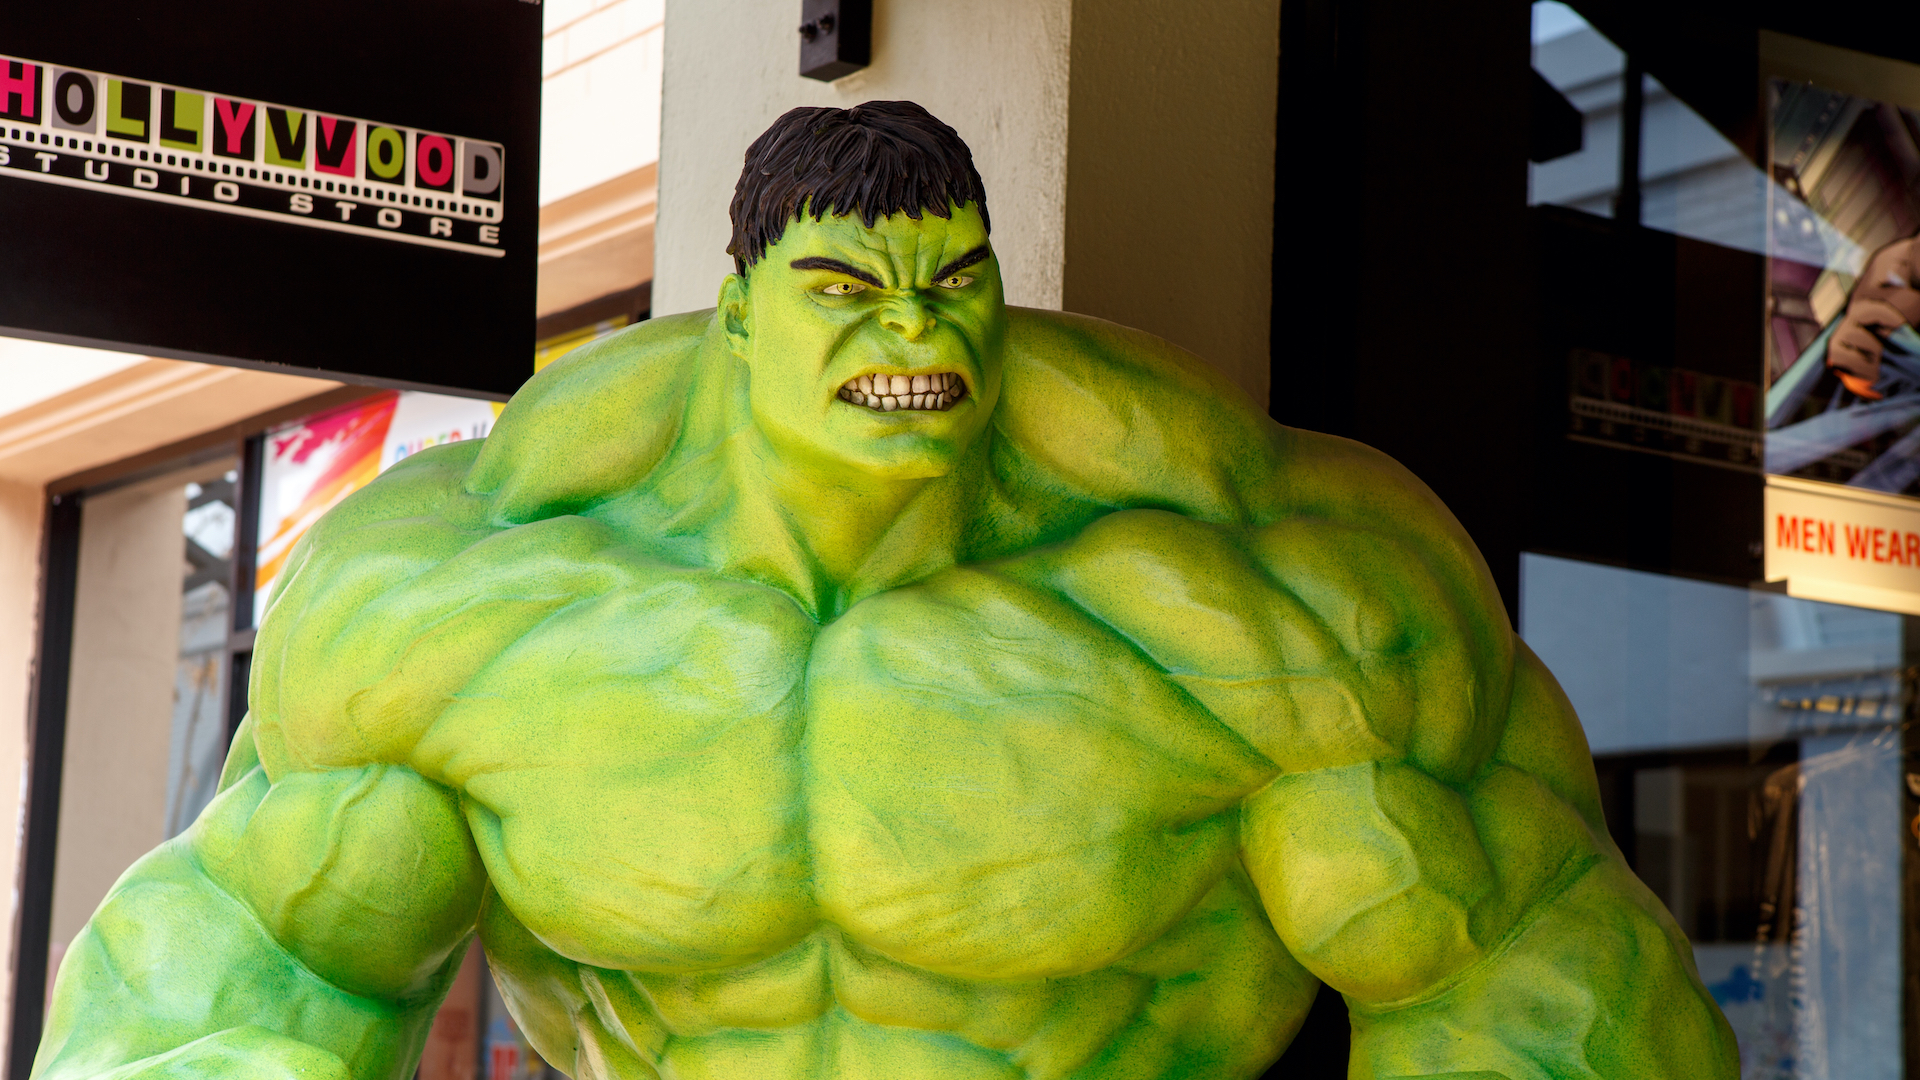 A model of the Hulk standing outside of a shop